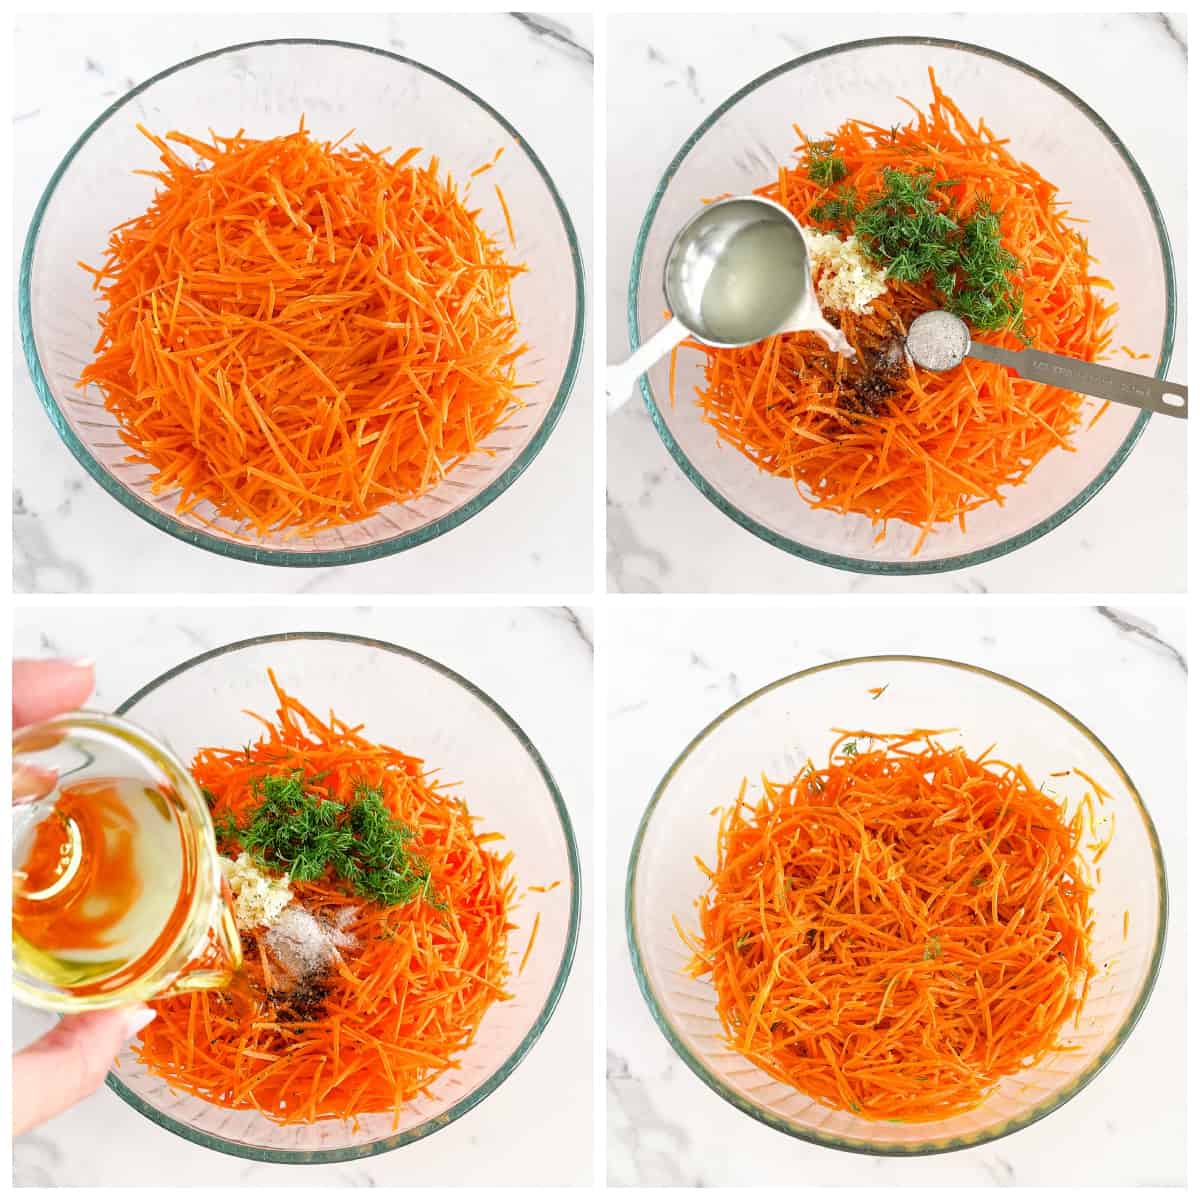 The final step is to let the salad chill in the fridge for a few hours before serving. This allows the carrots to absorb all the wonderful flavors from the dressing. 